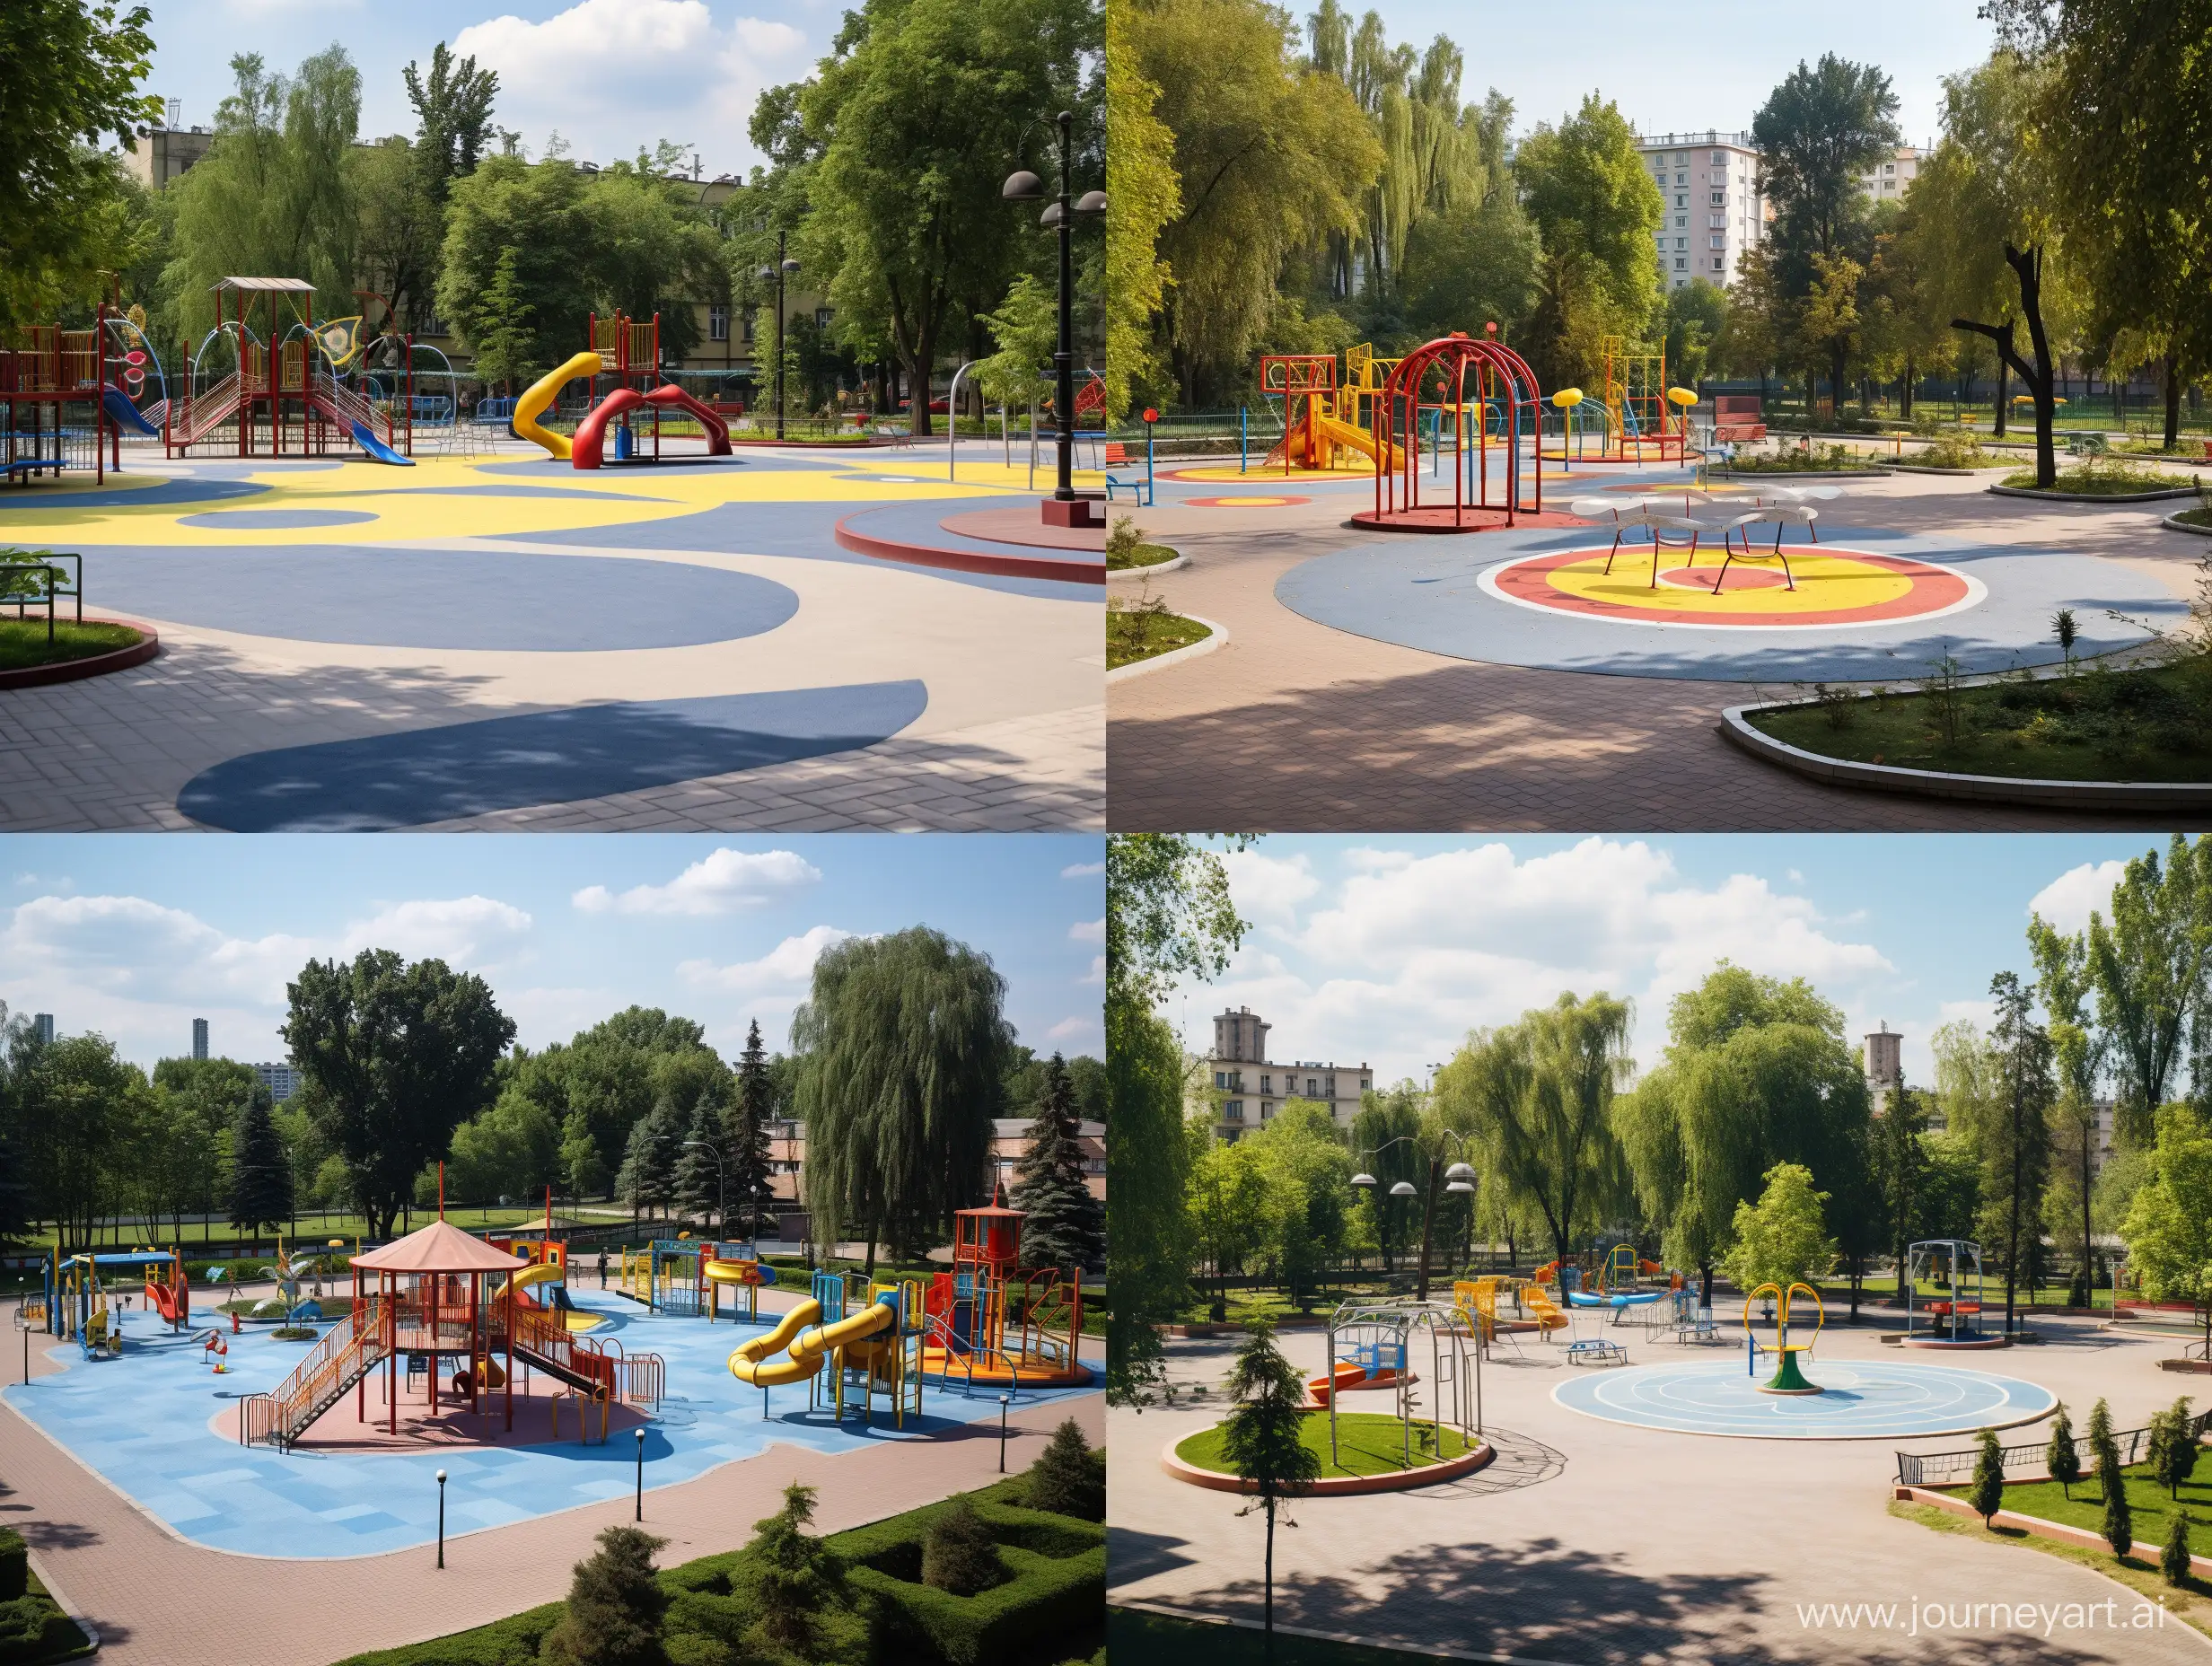 The photo shows a spacious square with various areas for active recreation. There are no houses or other buildings nearby. In the center you can see a children's playground with swings, slides and carousels, surrounded by soft surfaces for the safety of children. Next to the children's playground there is a training area equipped with various sports equipment for physical exercise. In another corner of the square there is a work-out area with various sports equipment designed to strengthen muscles and maintain physical fitness. Next to it is a multi-purpose sports court with basketball hoops, football goals and a volleyball net, where sports lovers can indulge in competitive games. The square is decorated with landscaping with a variety of trees, flowering shrubs and lawns, flowers, creating a pleasant atmosphere. Between the zones there are paths and sidewalks for walking, as well as areas with benches and tables where people can relax and enjoy nature.